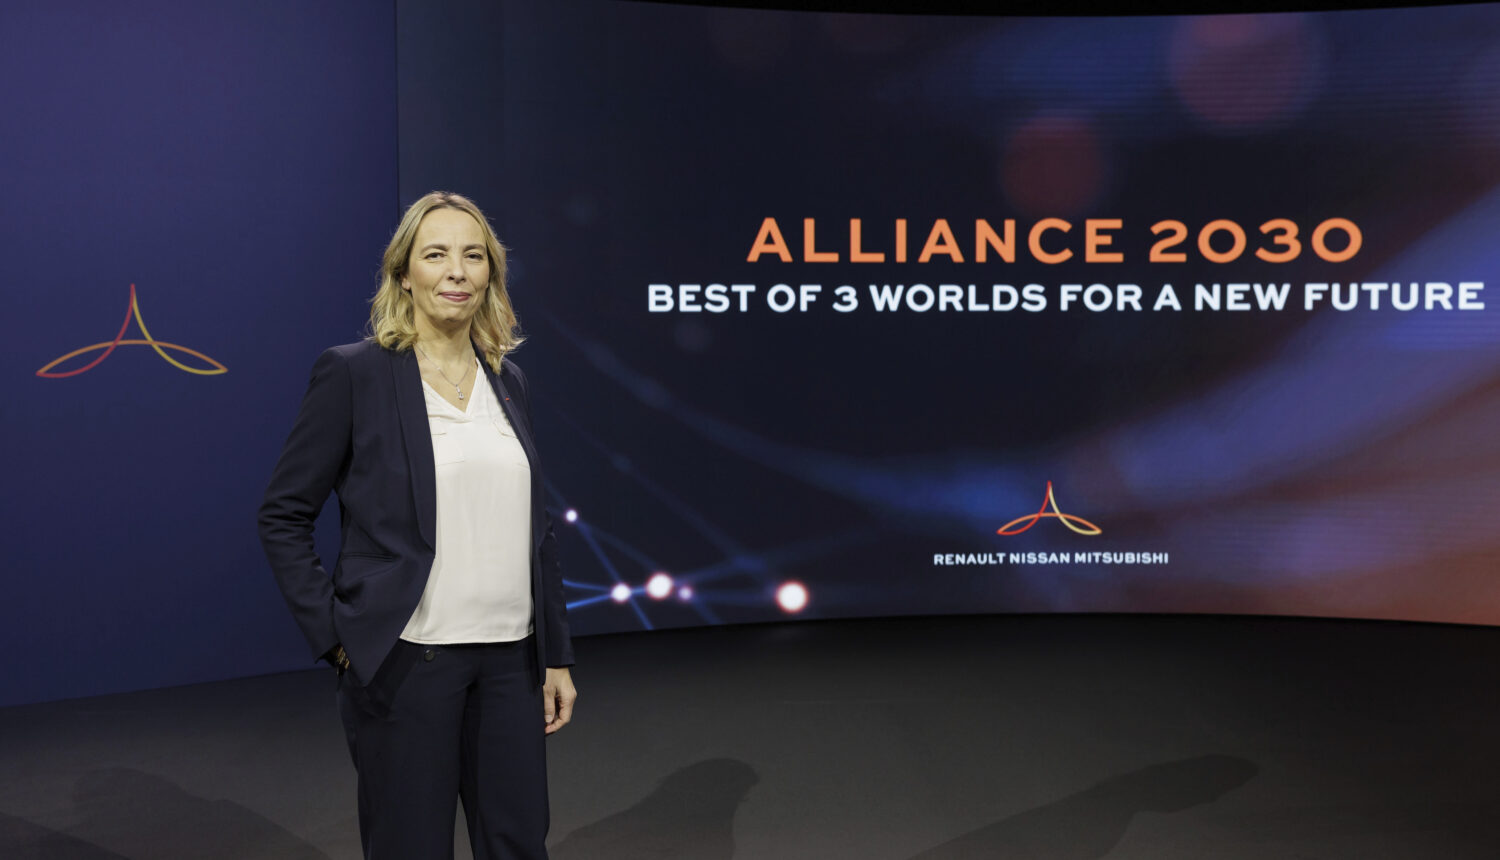 Alliance 2030 - Best of 3 Worlds for a new future